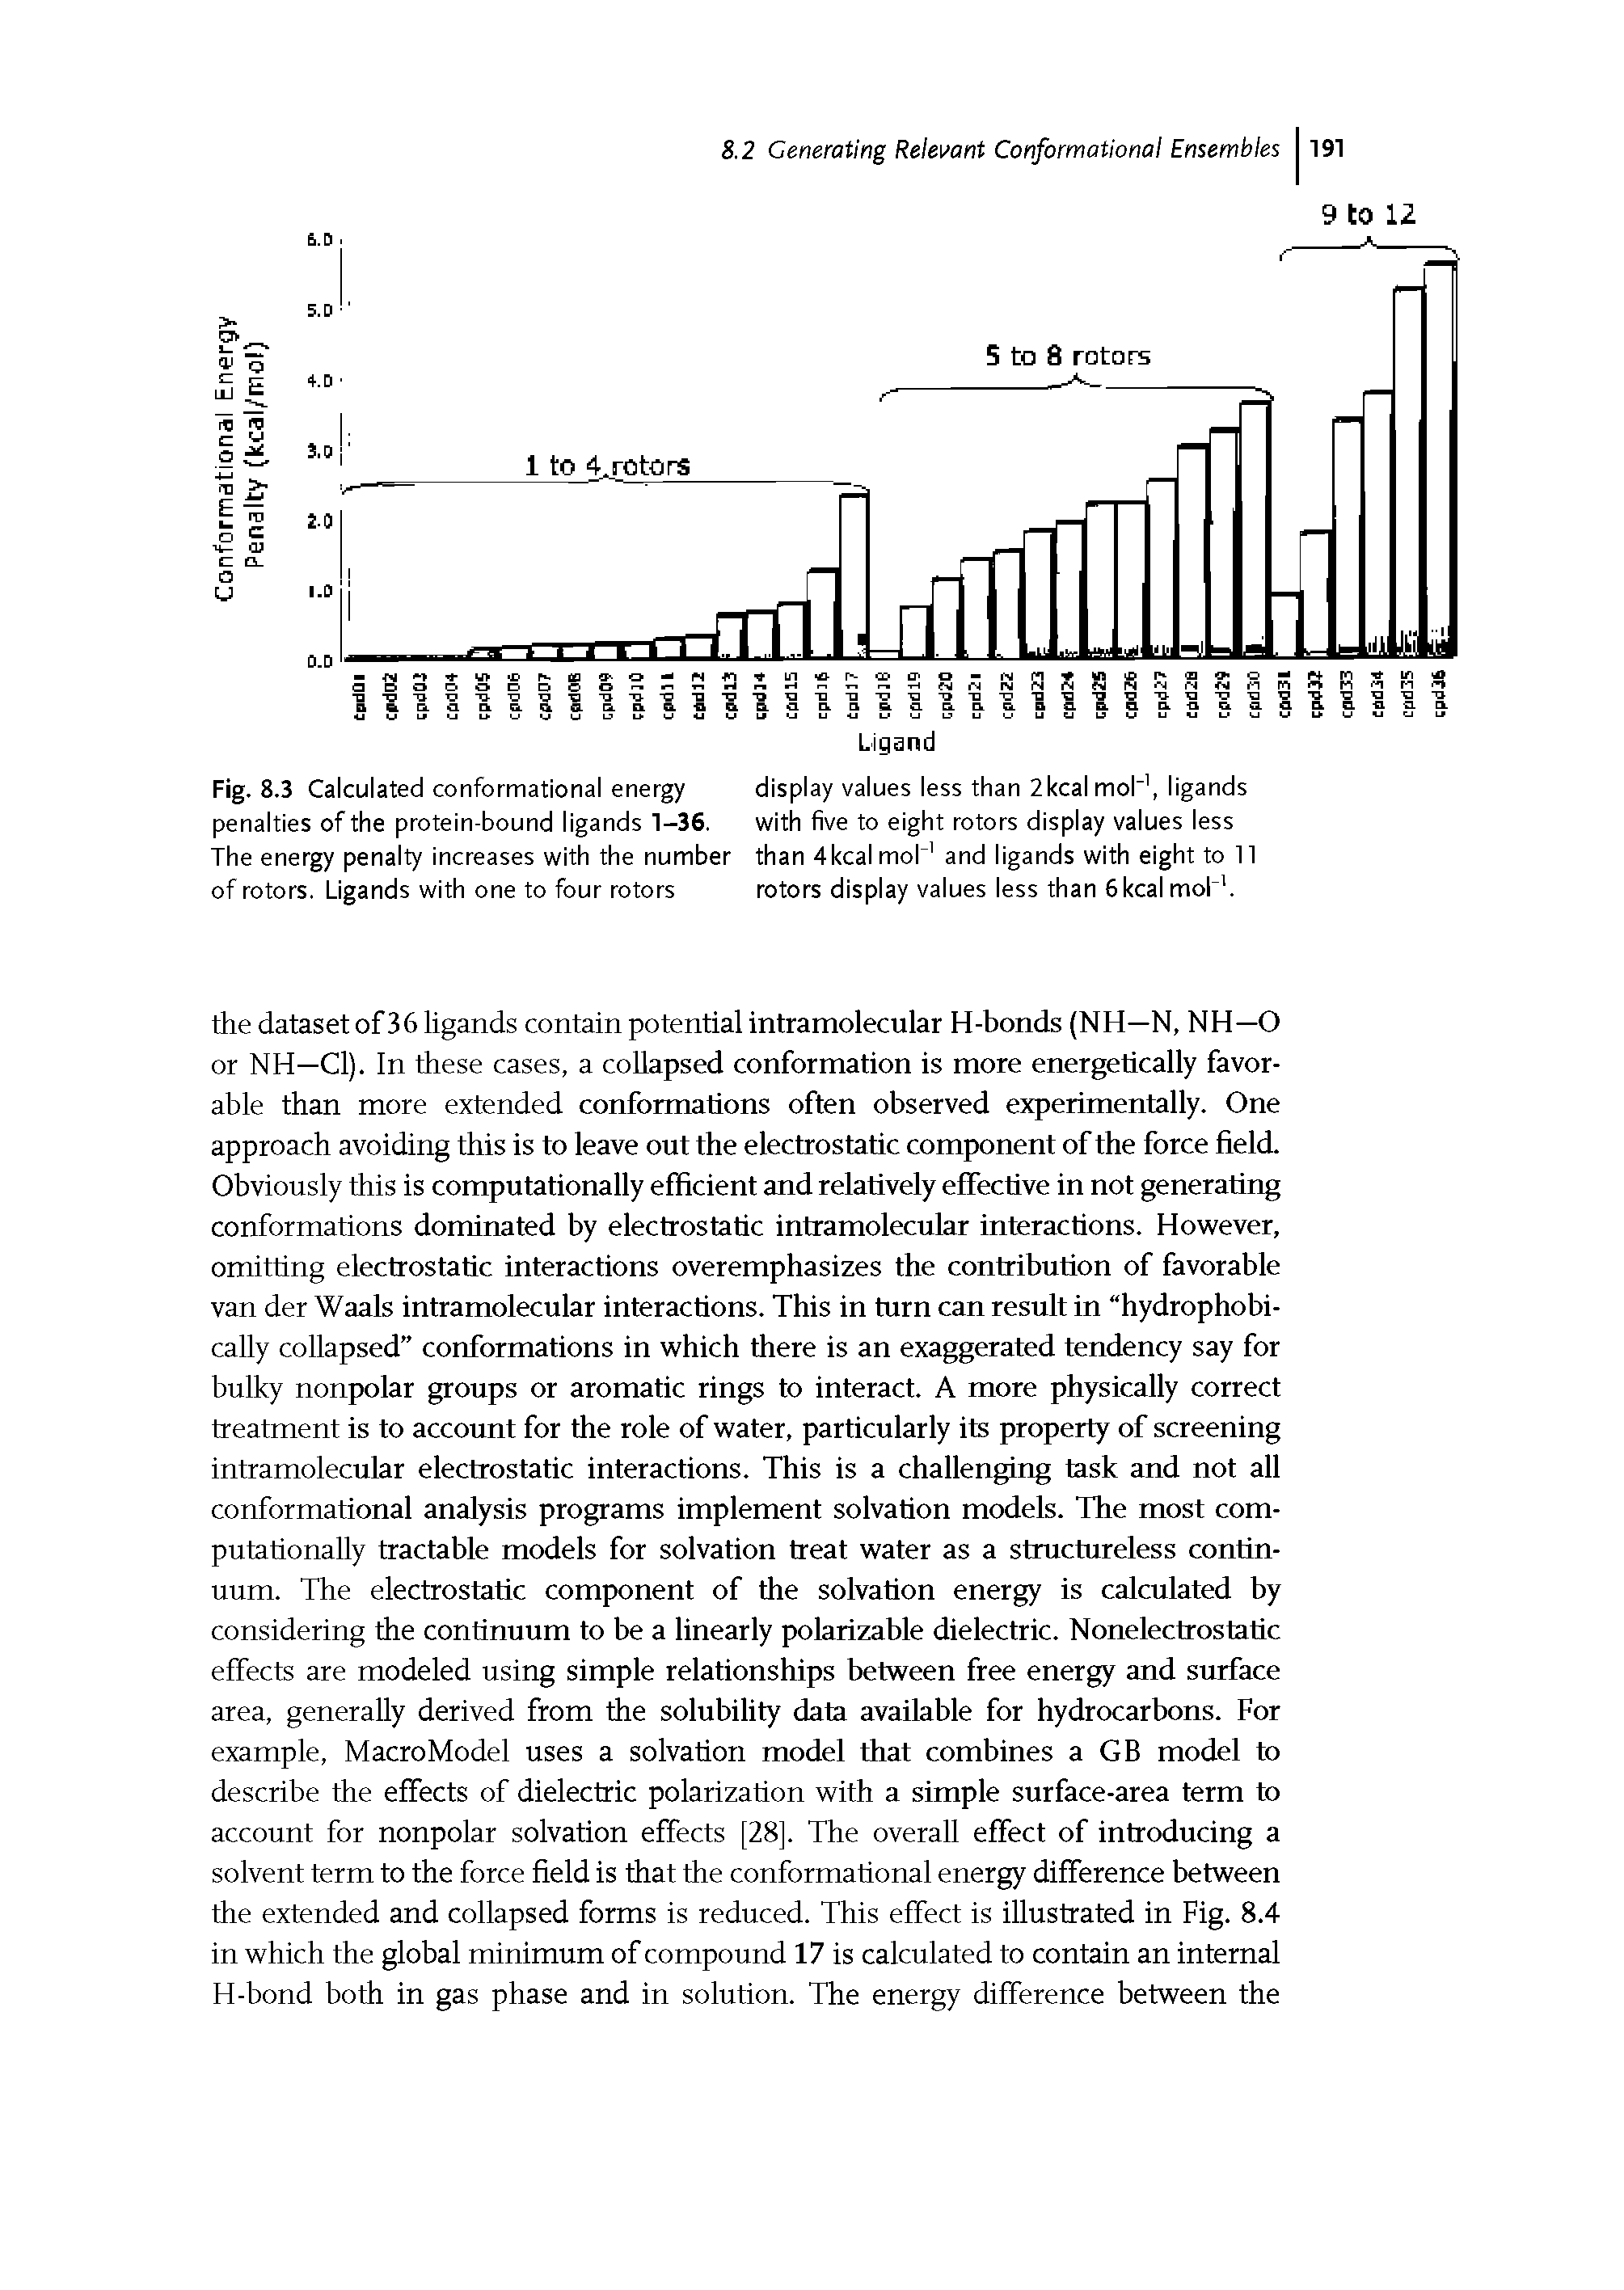 Fig. 8.3 Calculated conformational energy display values less than 2kcalmol ligands penalties of the protein-bound ligands 1-36. with five to eight rotors display values less The energy penalty increases with the number than 4kcalmol and ligands with eight to 11 of rotors. Ligands with one to four rotors rotors display values less than 6kcal mol. ...